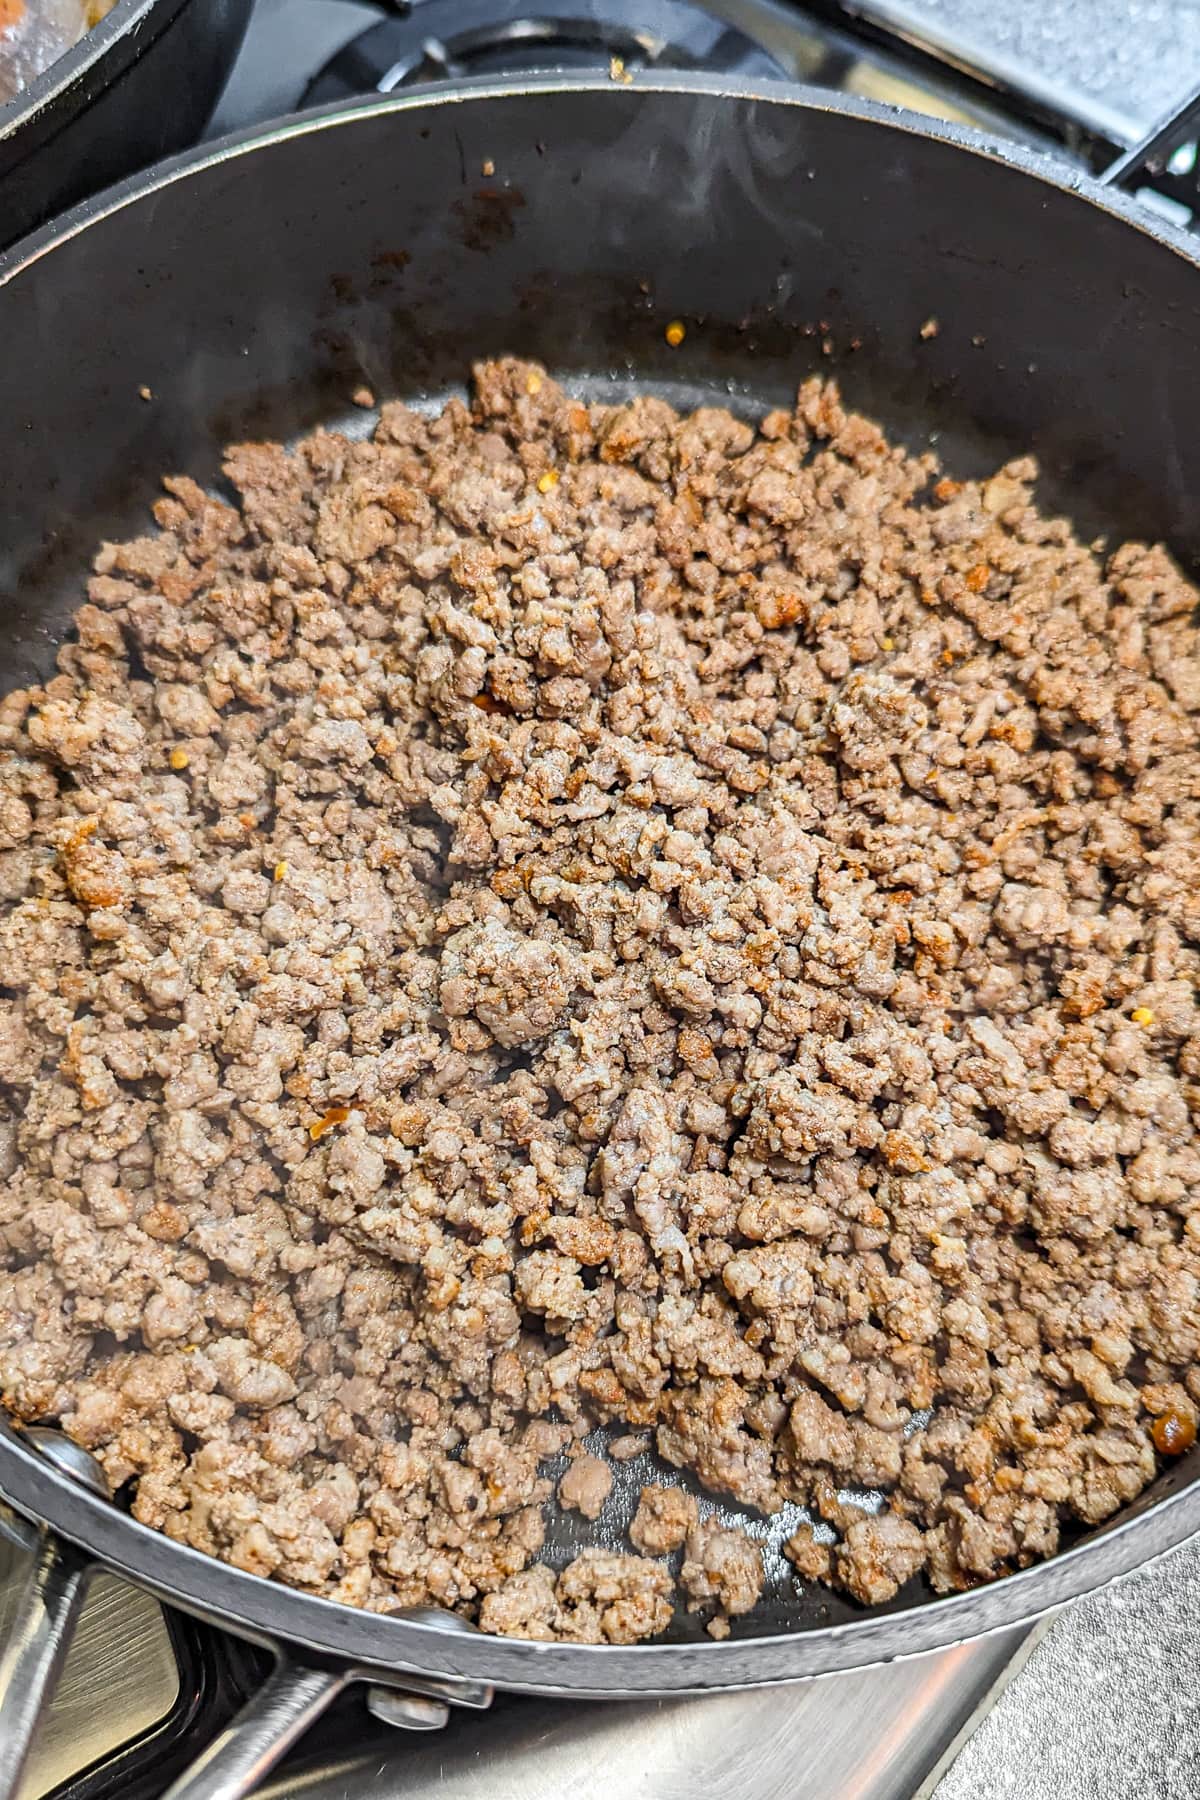 Frying ground beef in a pan on the stove.